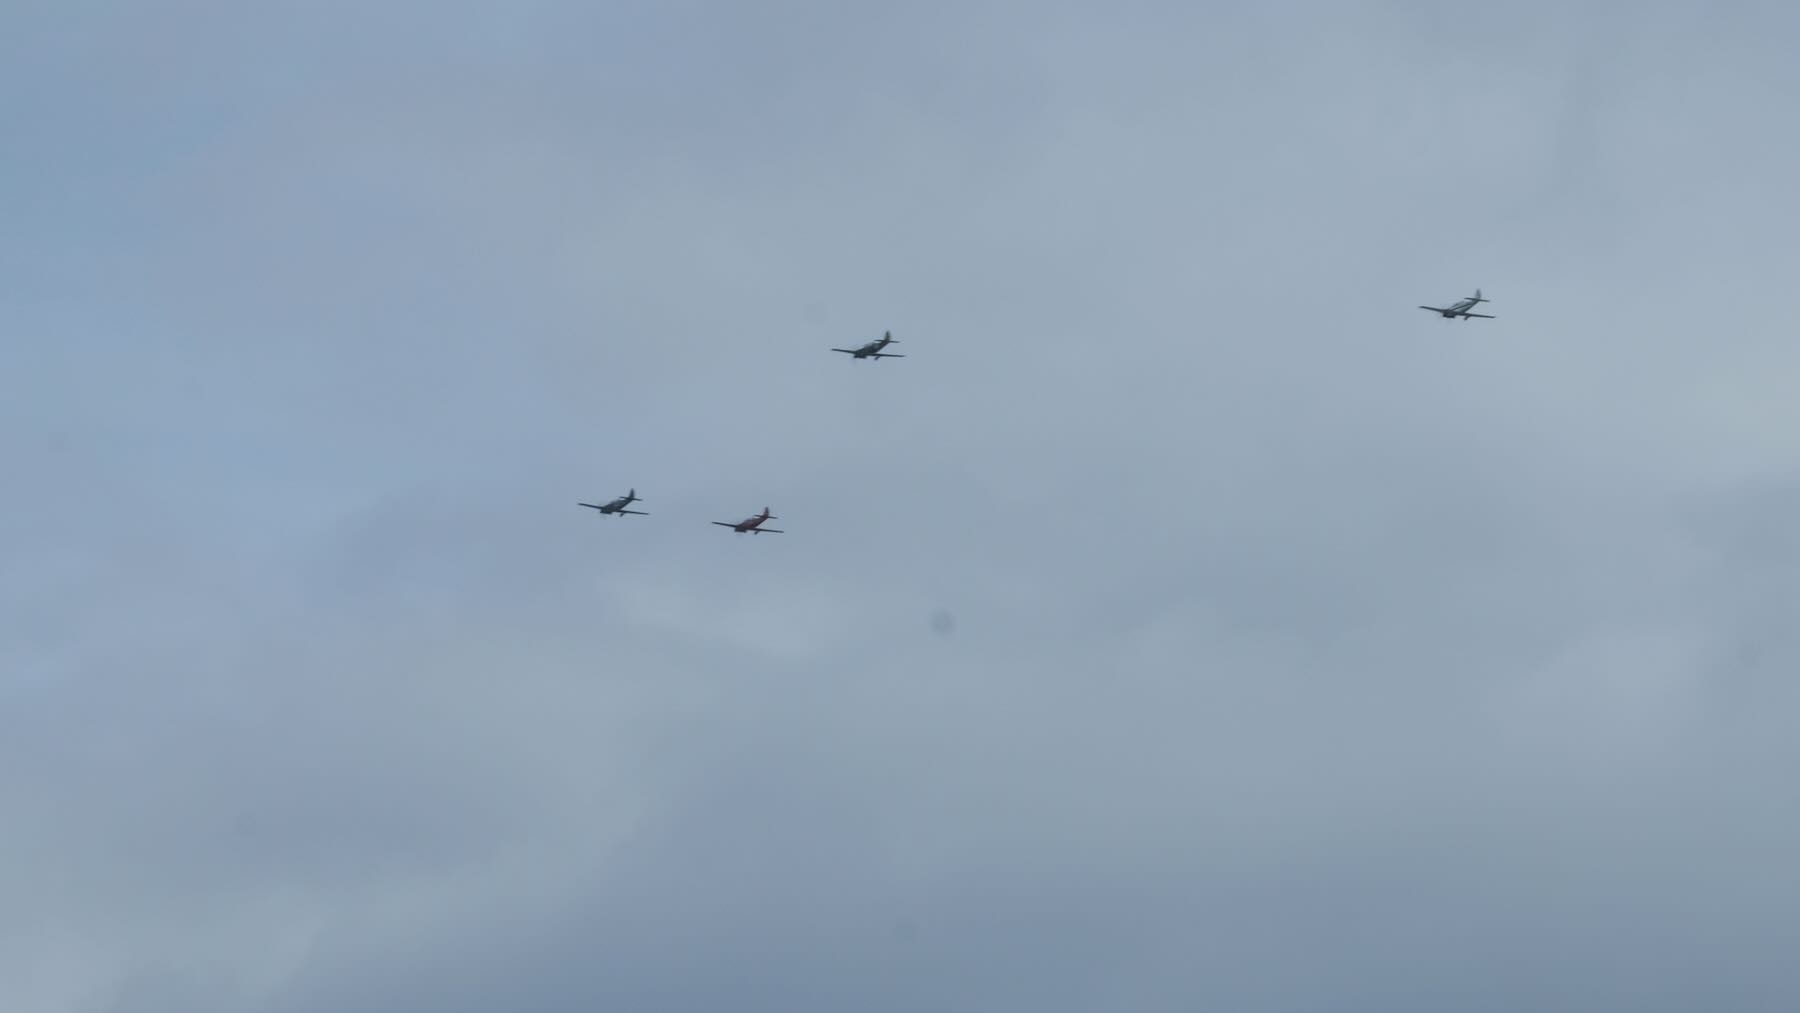 4 of the 9 mystery planes in formation. 